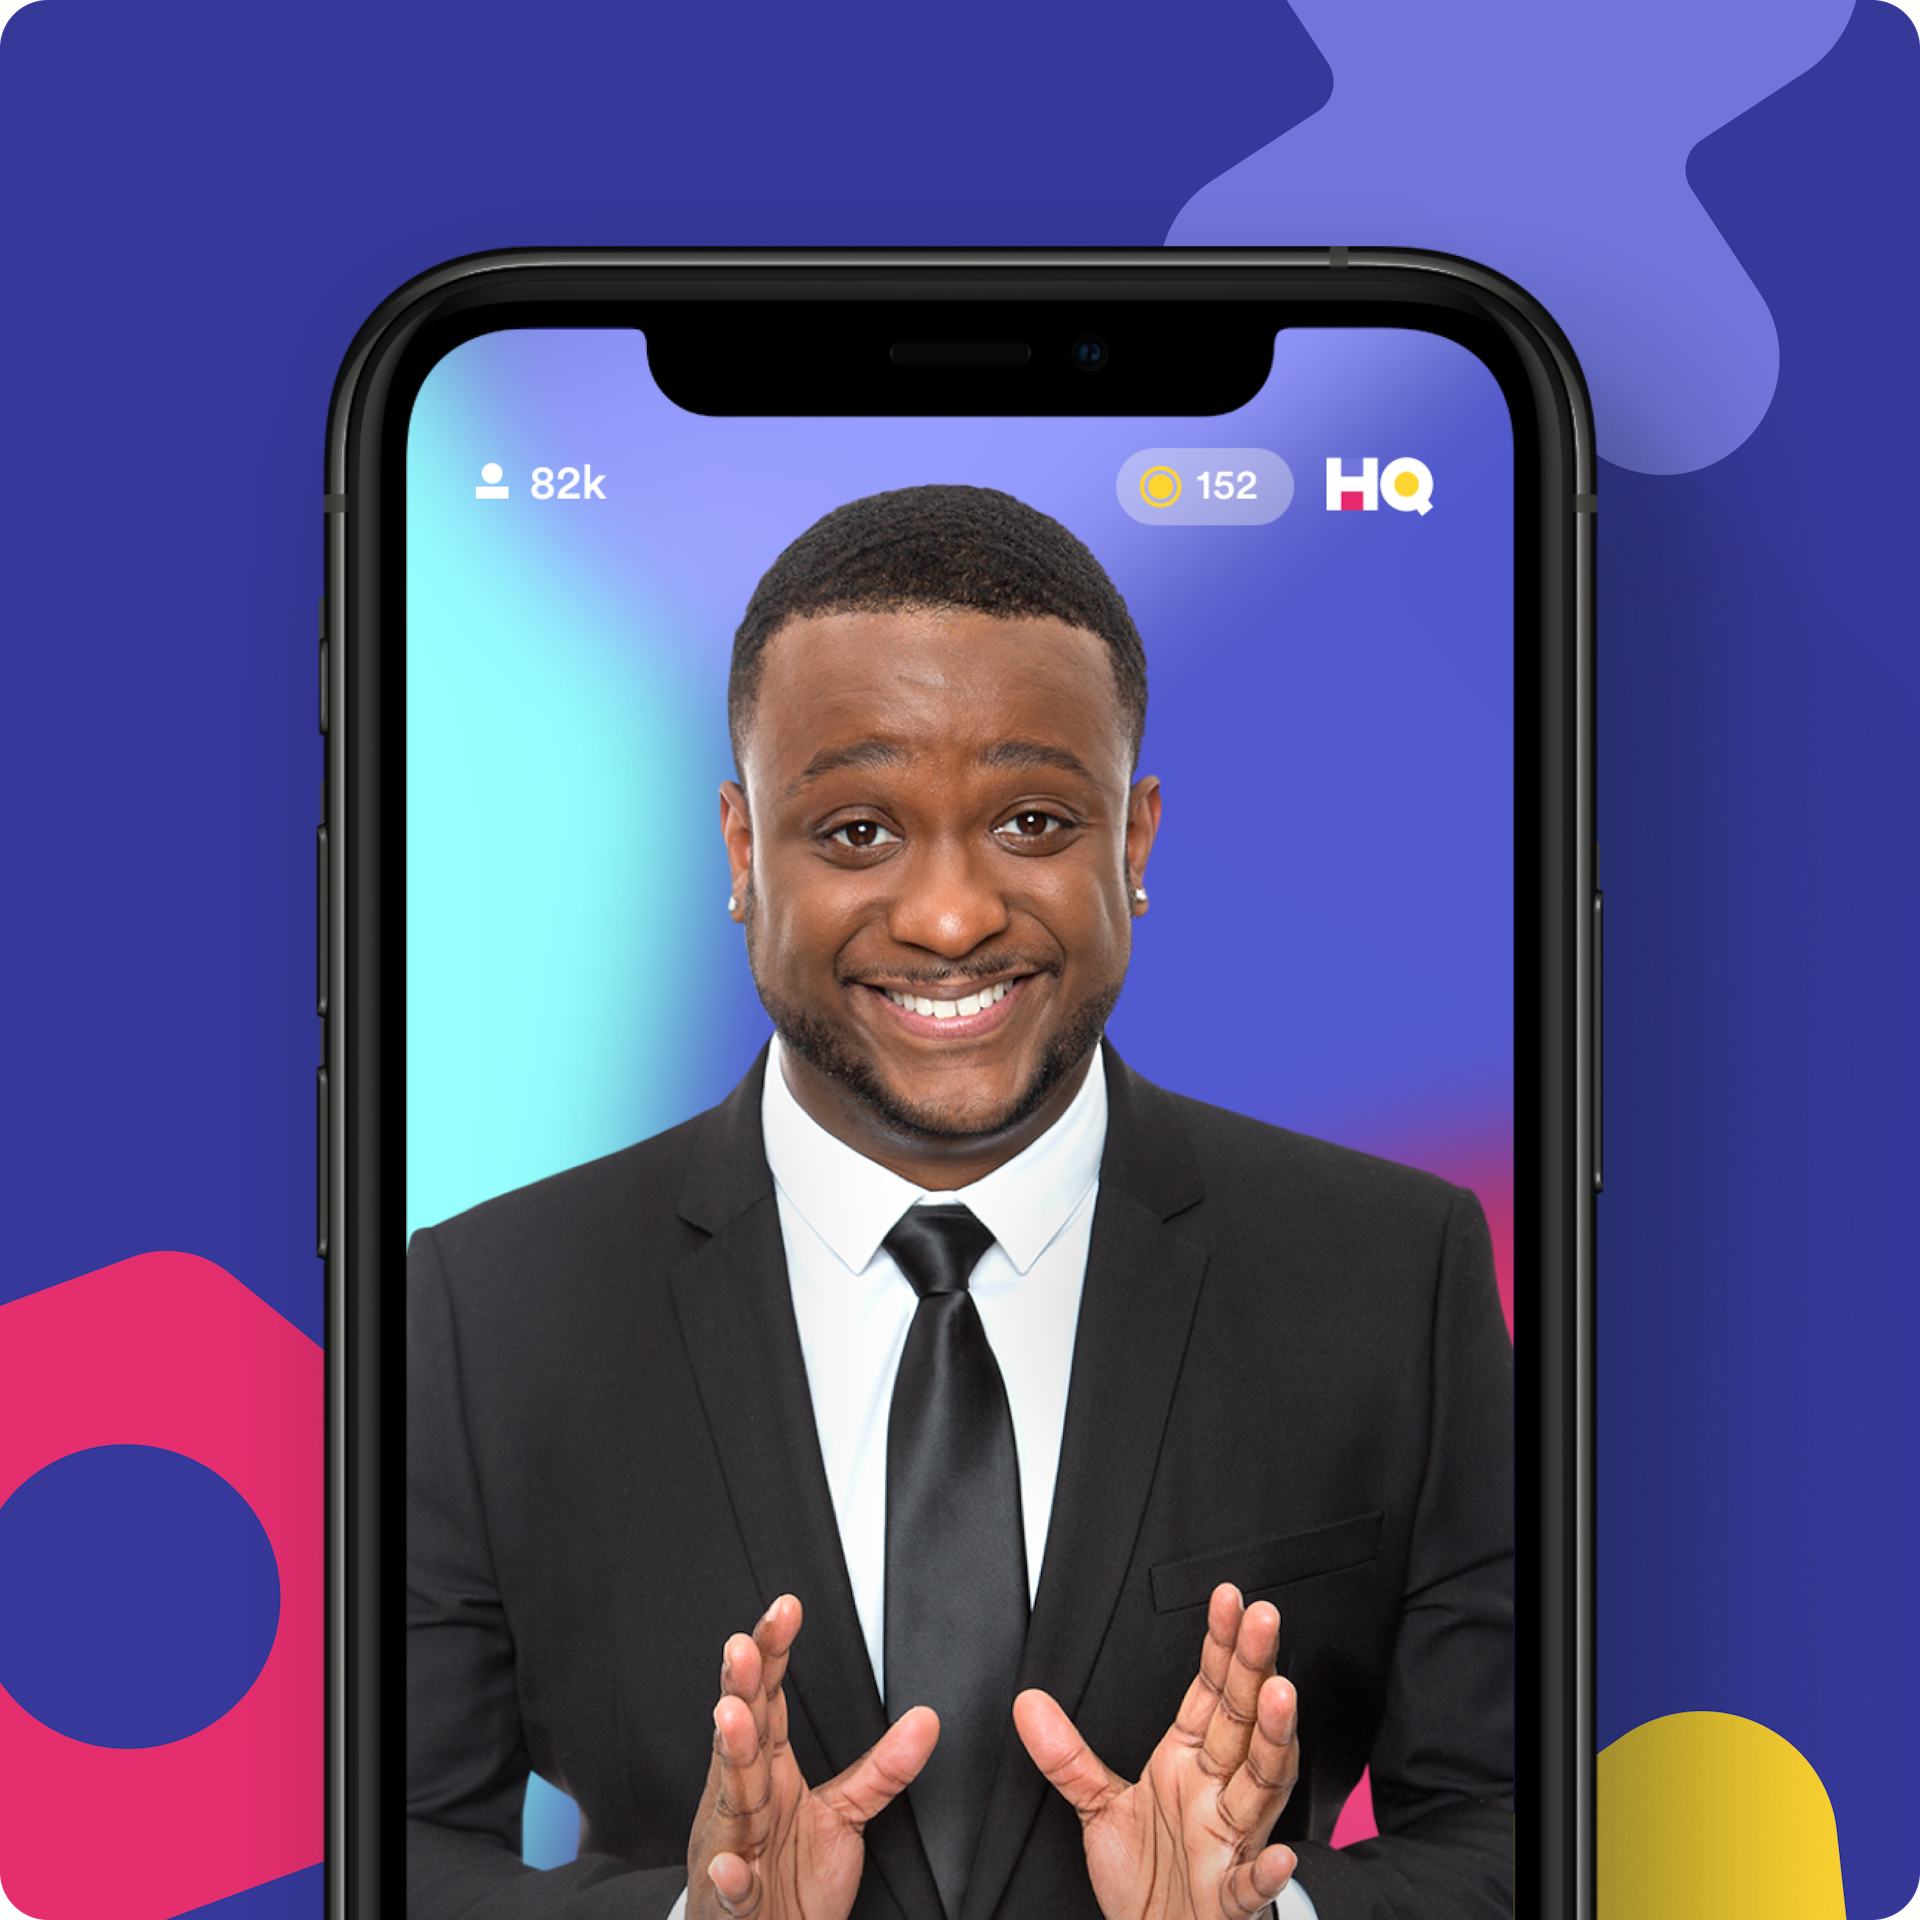 Designs we did for HQ Trivia 